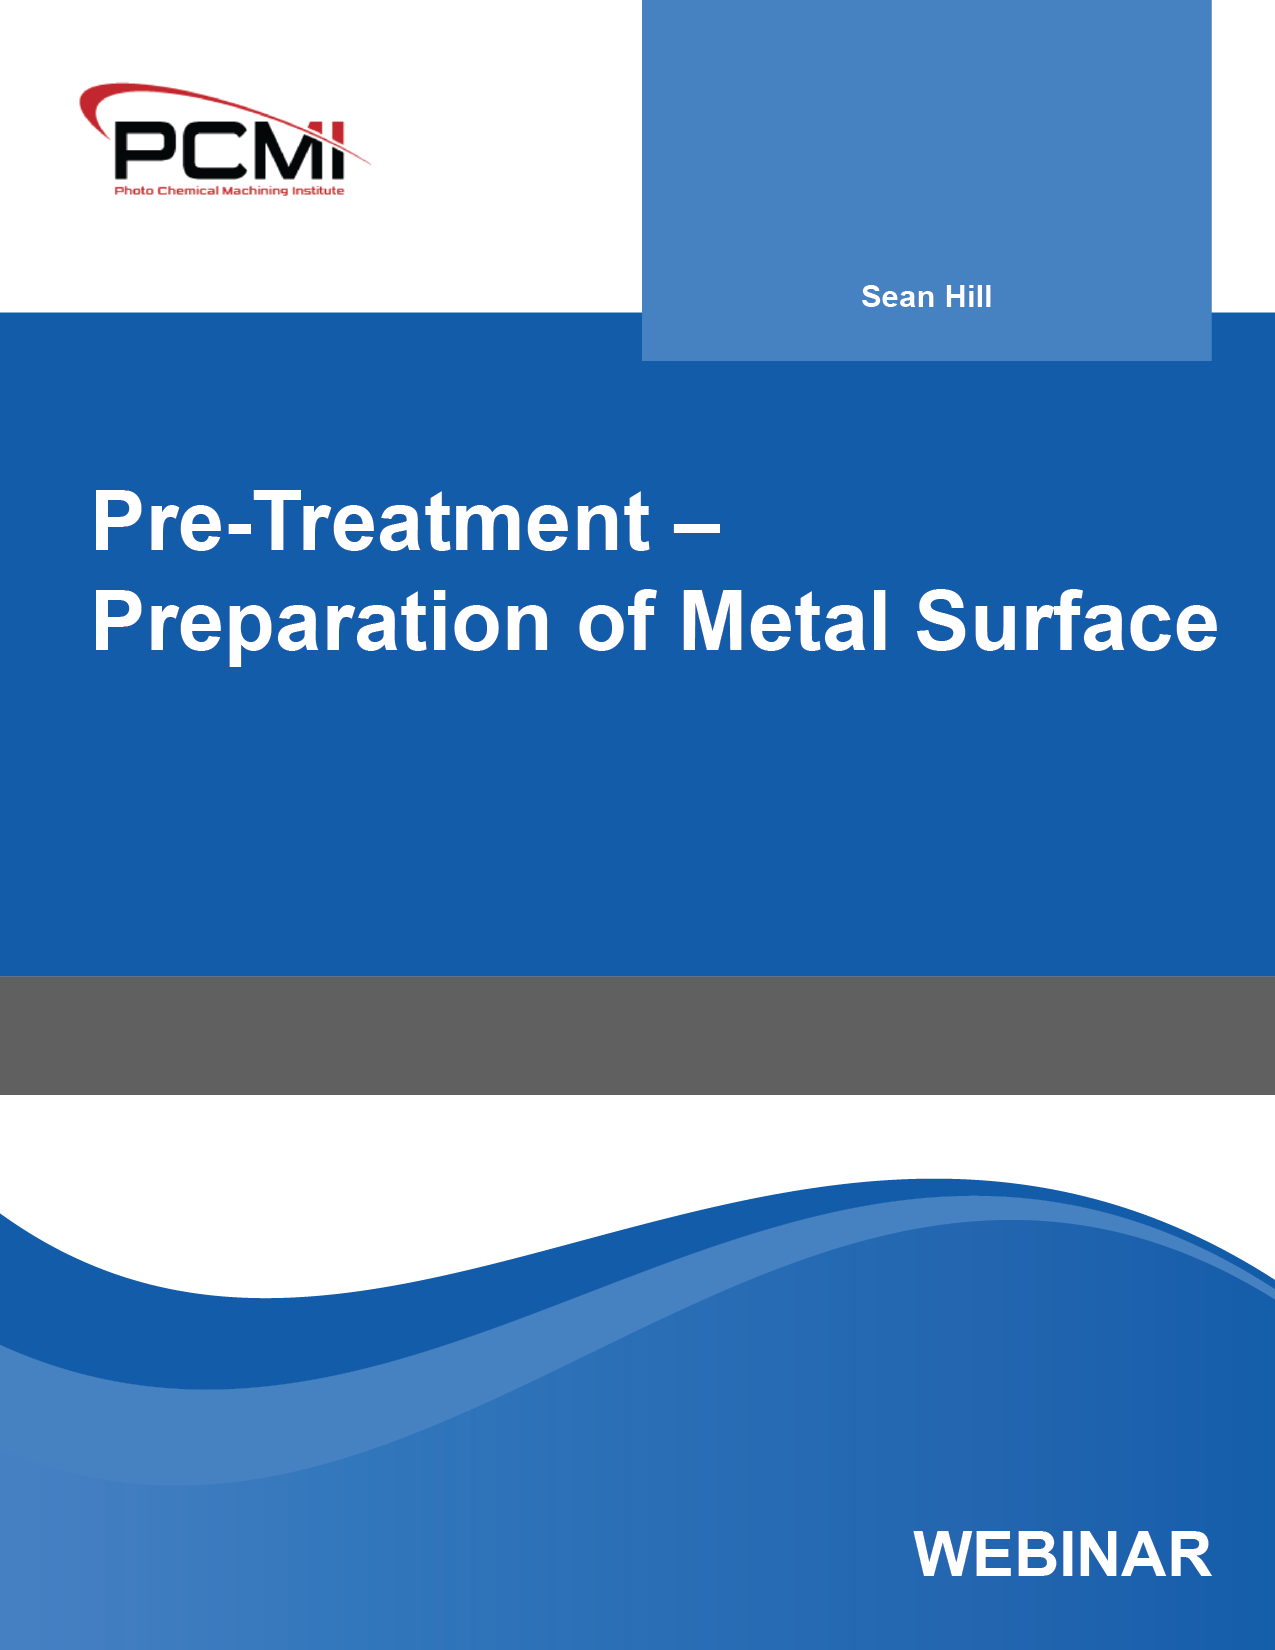 Pre-Treatment – Preparation of Metal Surface